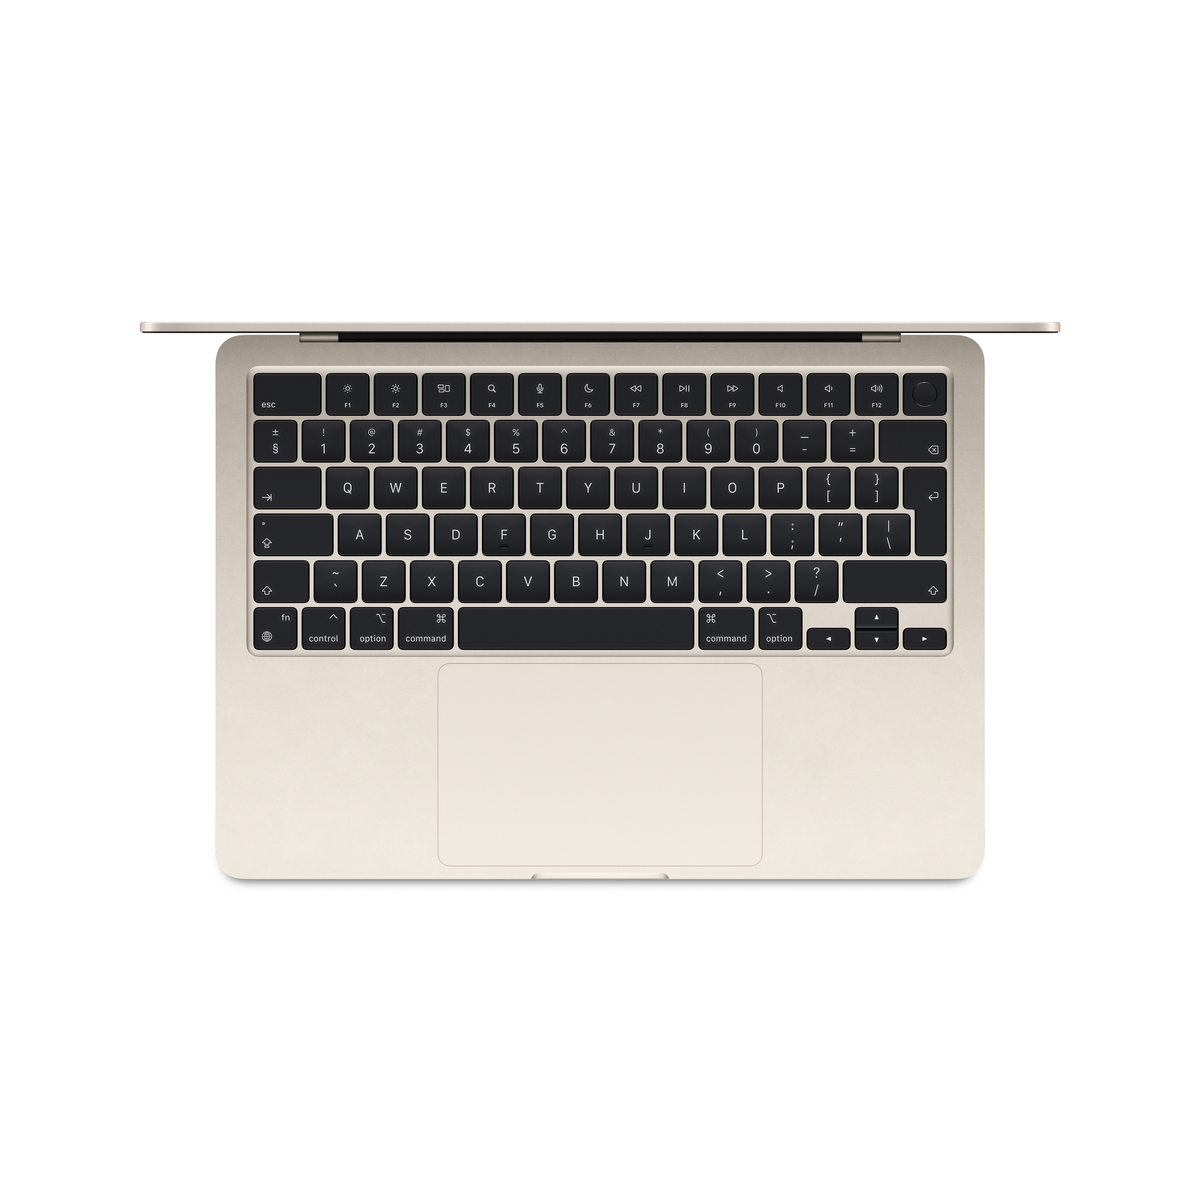 Apple MacBook Air, 13 inches, 8 GB RAM, 256 GB SSD, Apple M3 chip with 8-core CPU and 8-core GPU, macOS, Arabic, Starlight